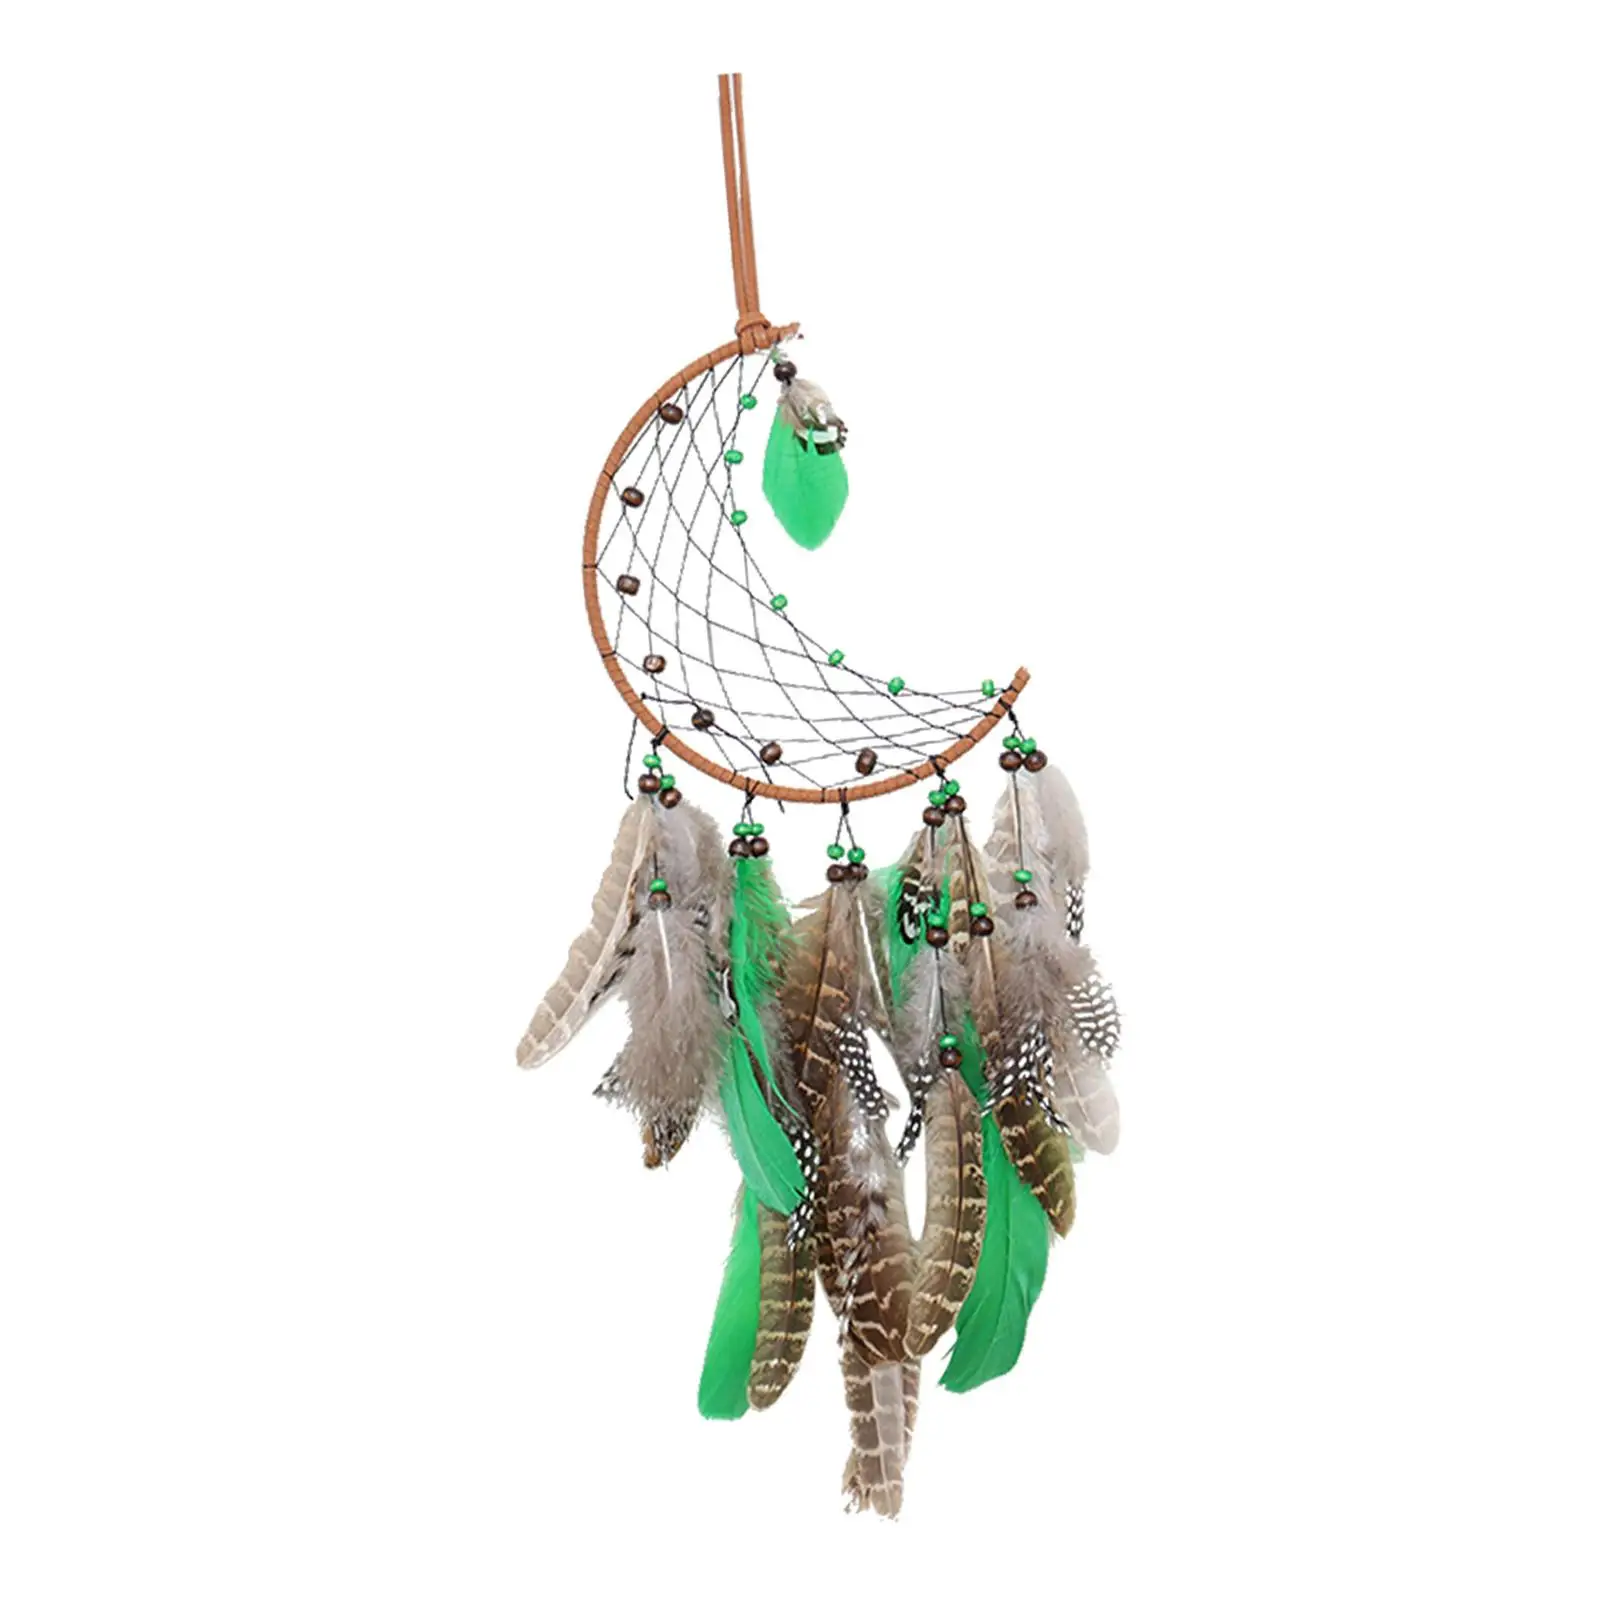 Dream Catcher Wall Hang Portable with Feathers Dream Net Home Decoration Handmade Ornament for Home Native Gift Car Children